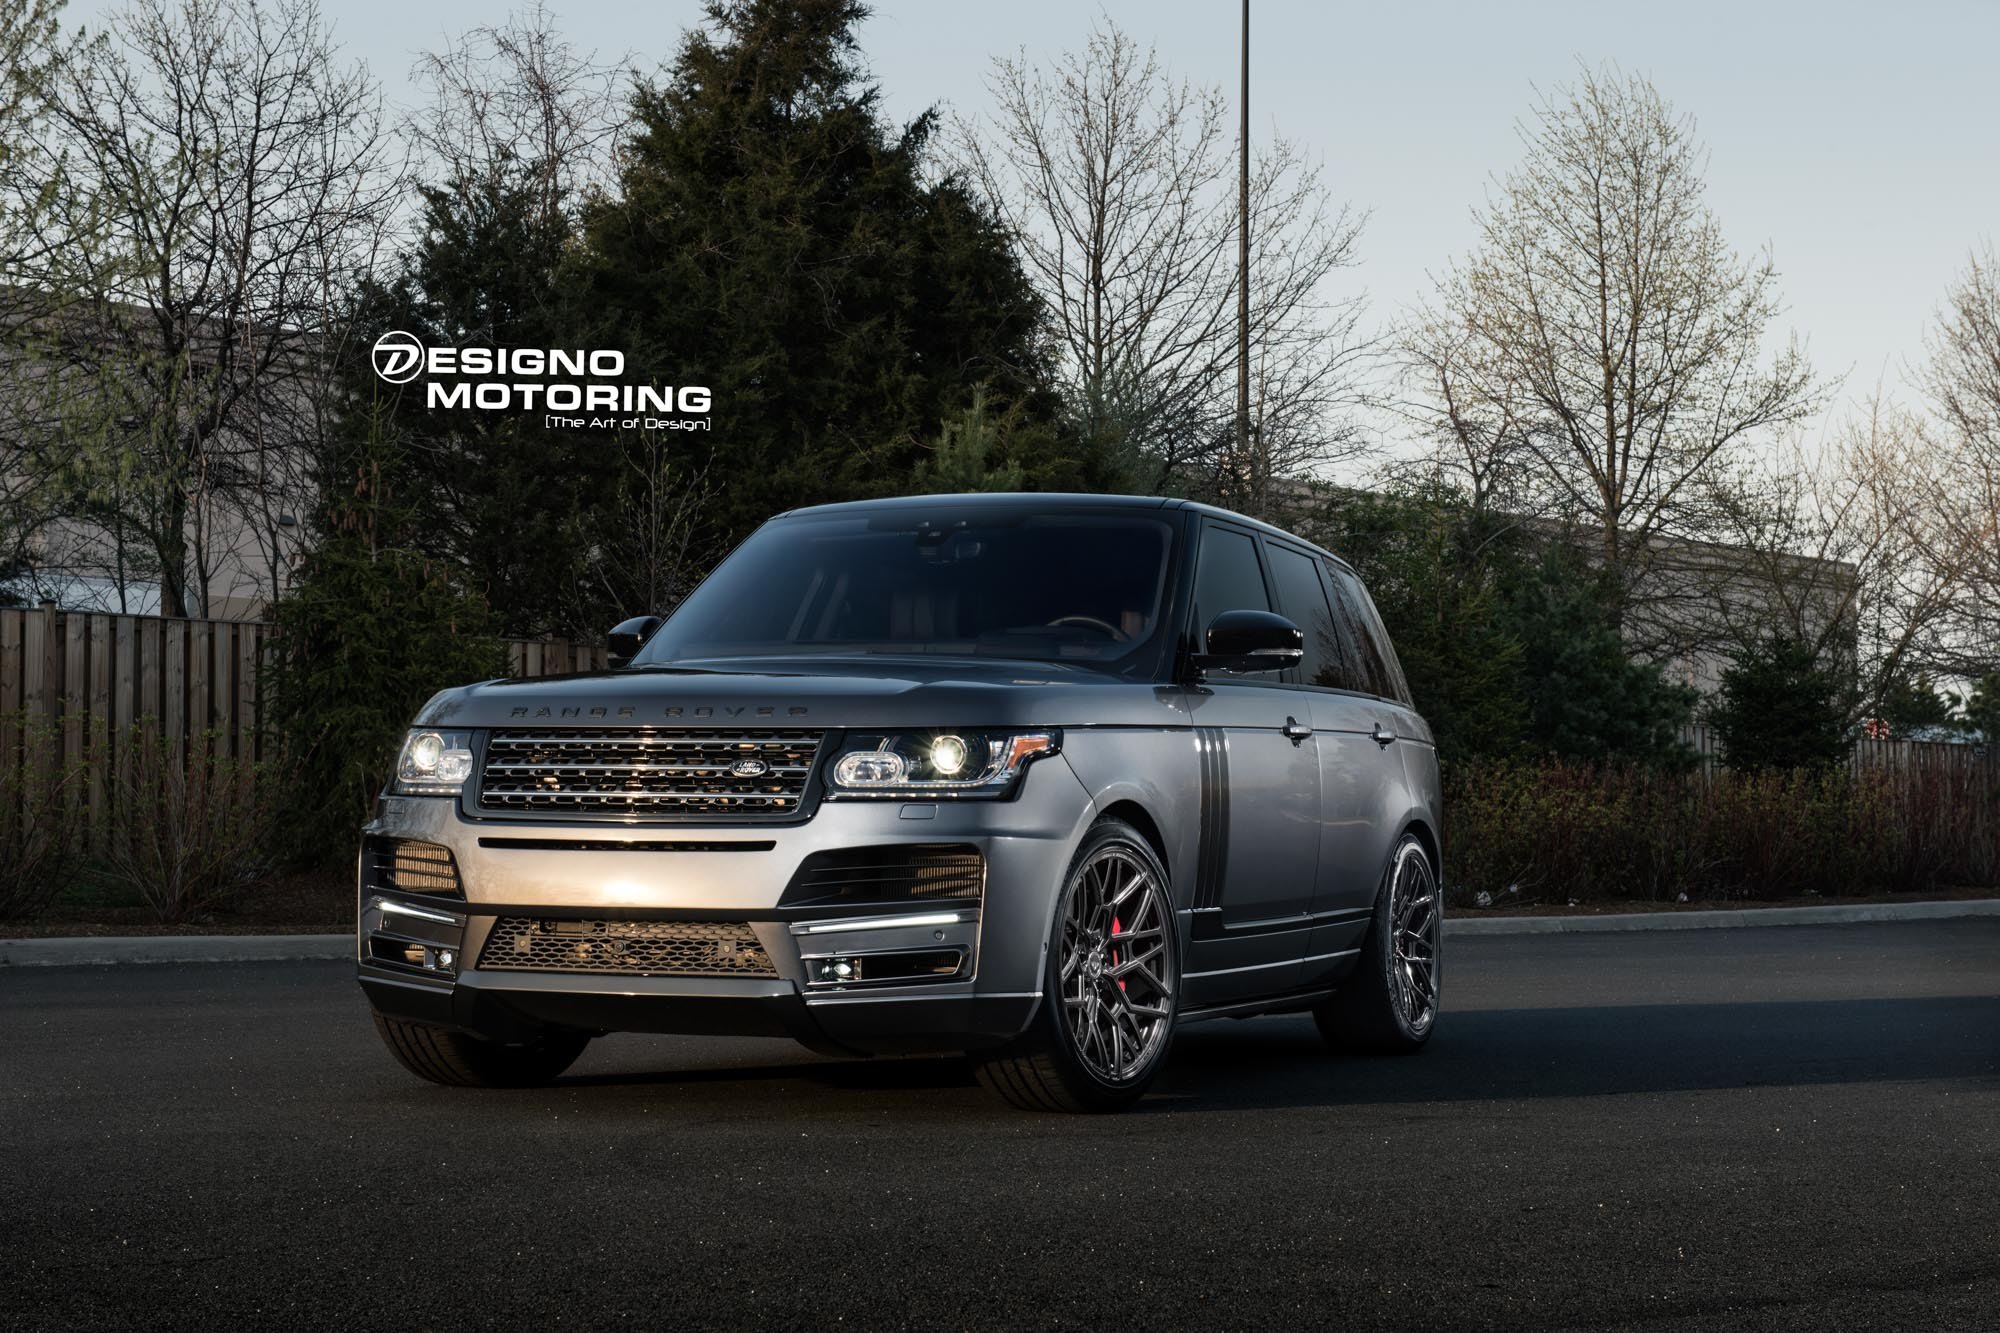 Gray Range Rover with Custom Projector Headlights - Photo by Vossen